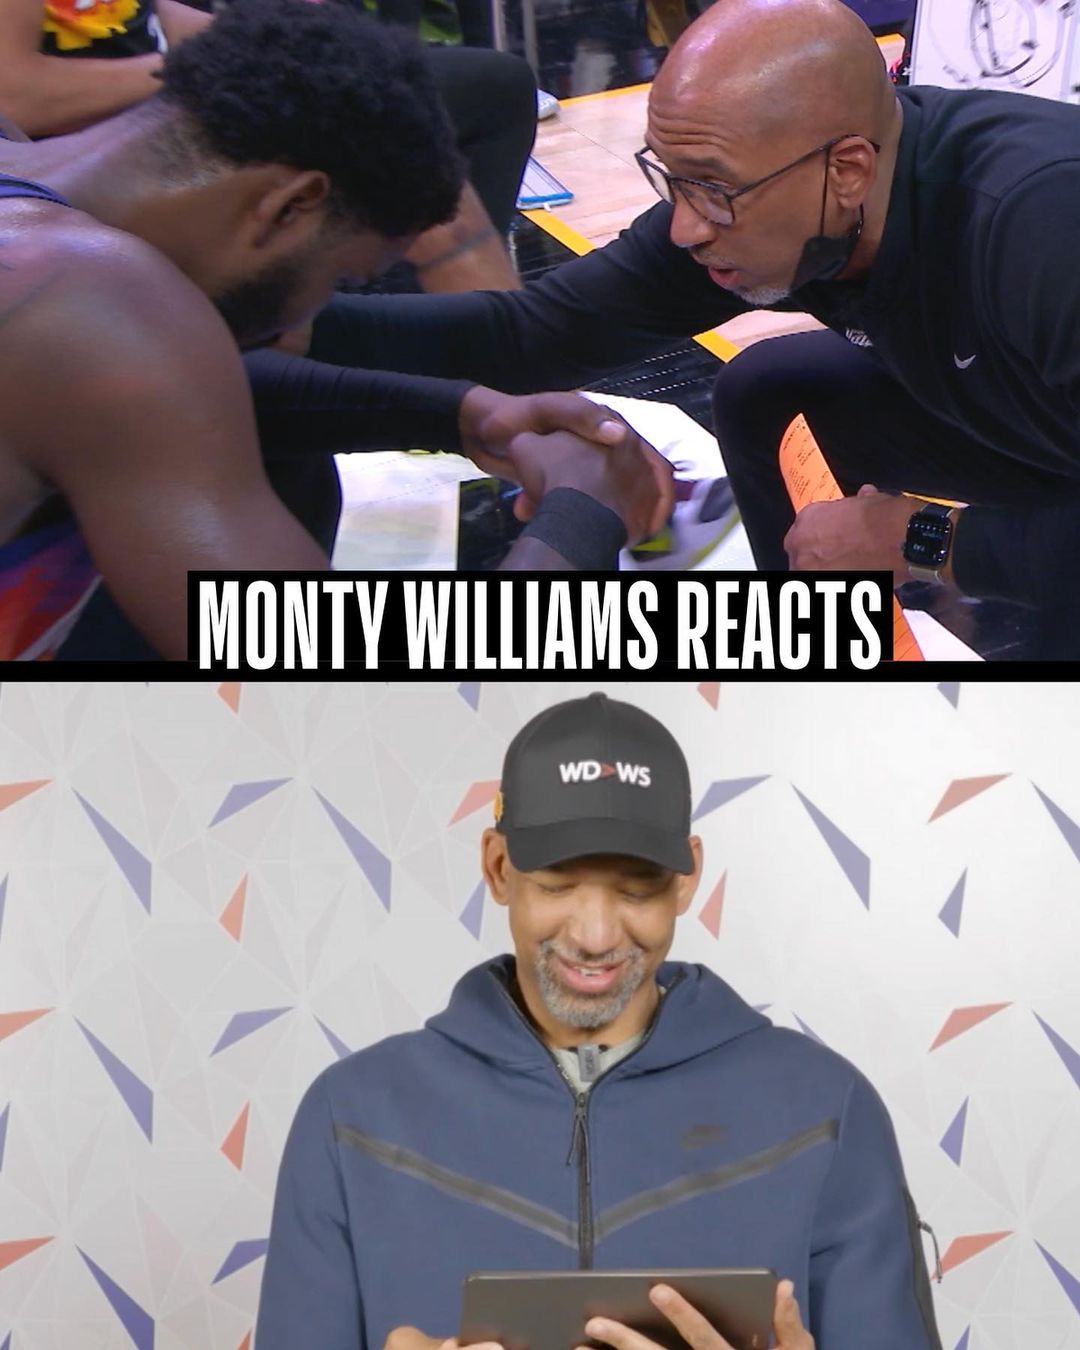 @suns Coach Monty Williams reacts to a moment of inspiration with @deandreayton ...